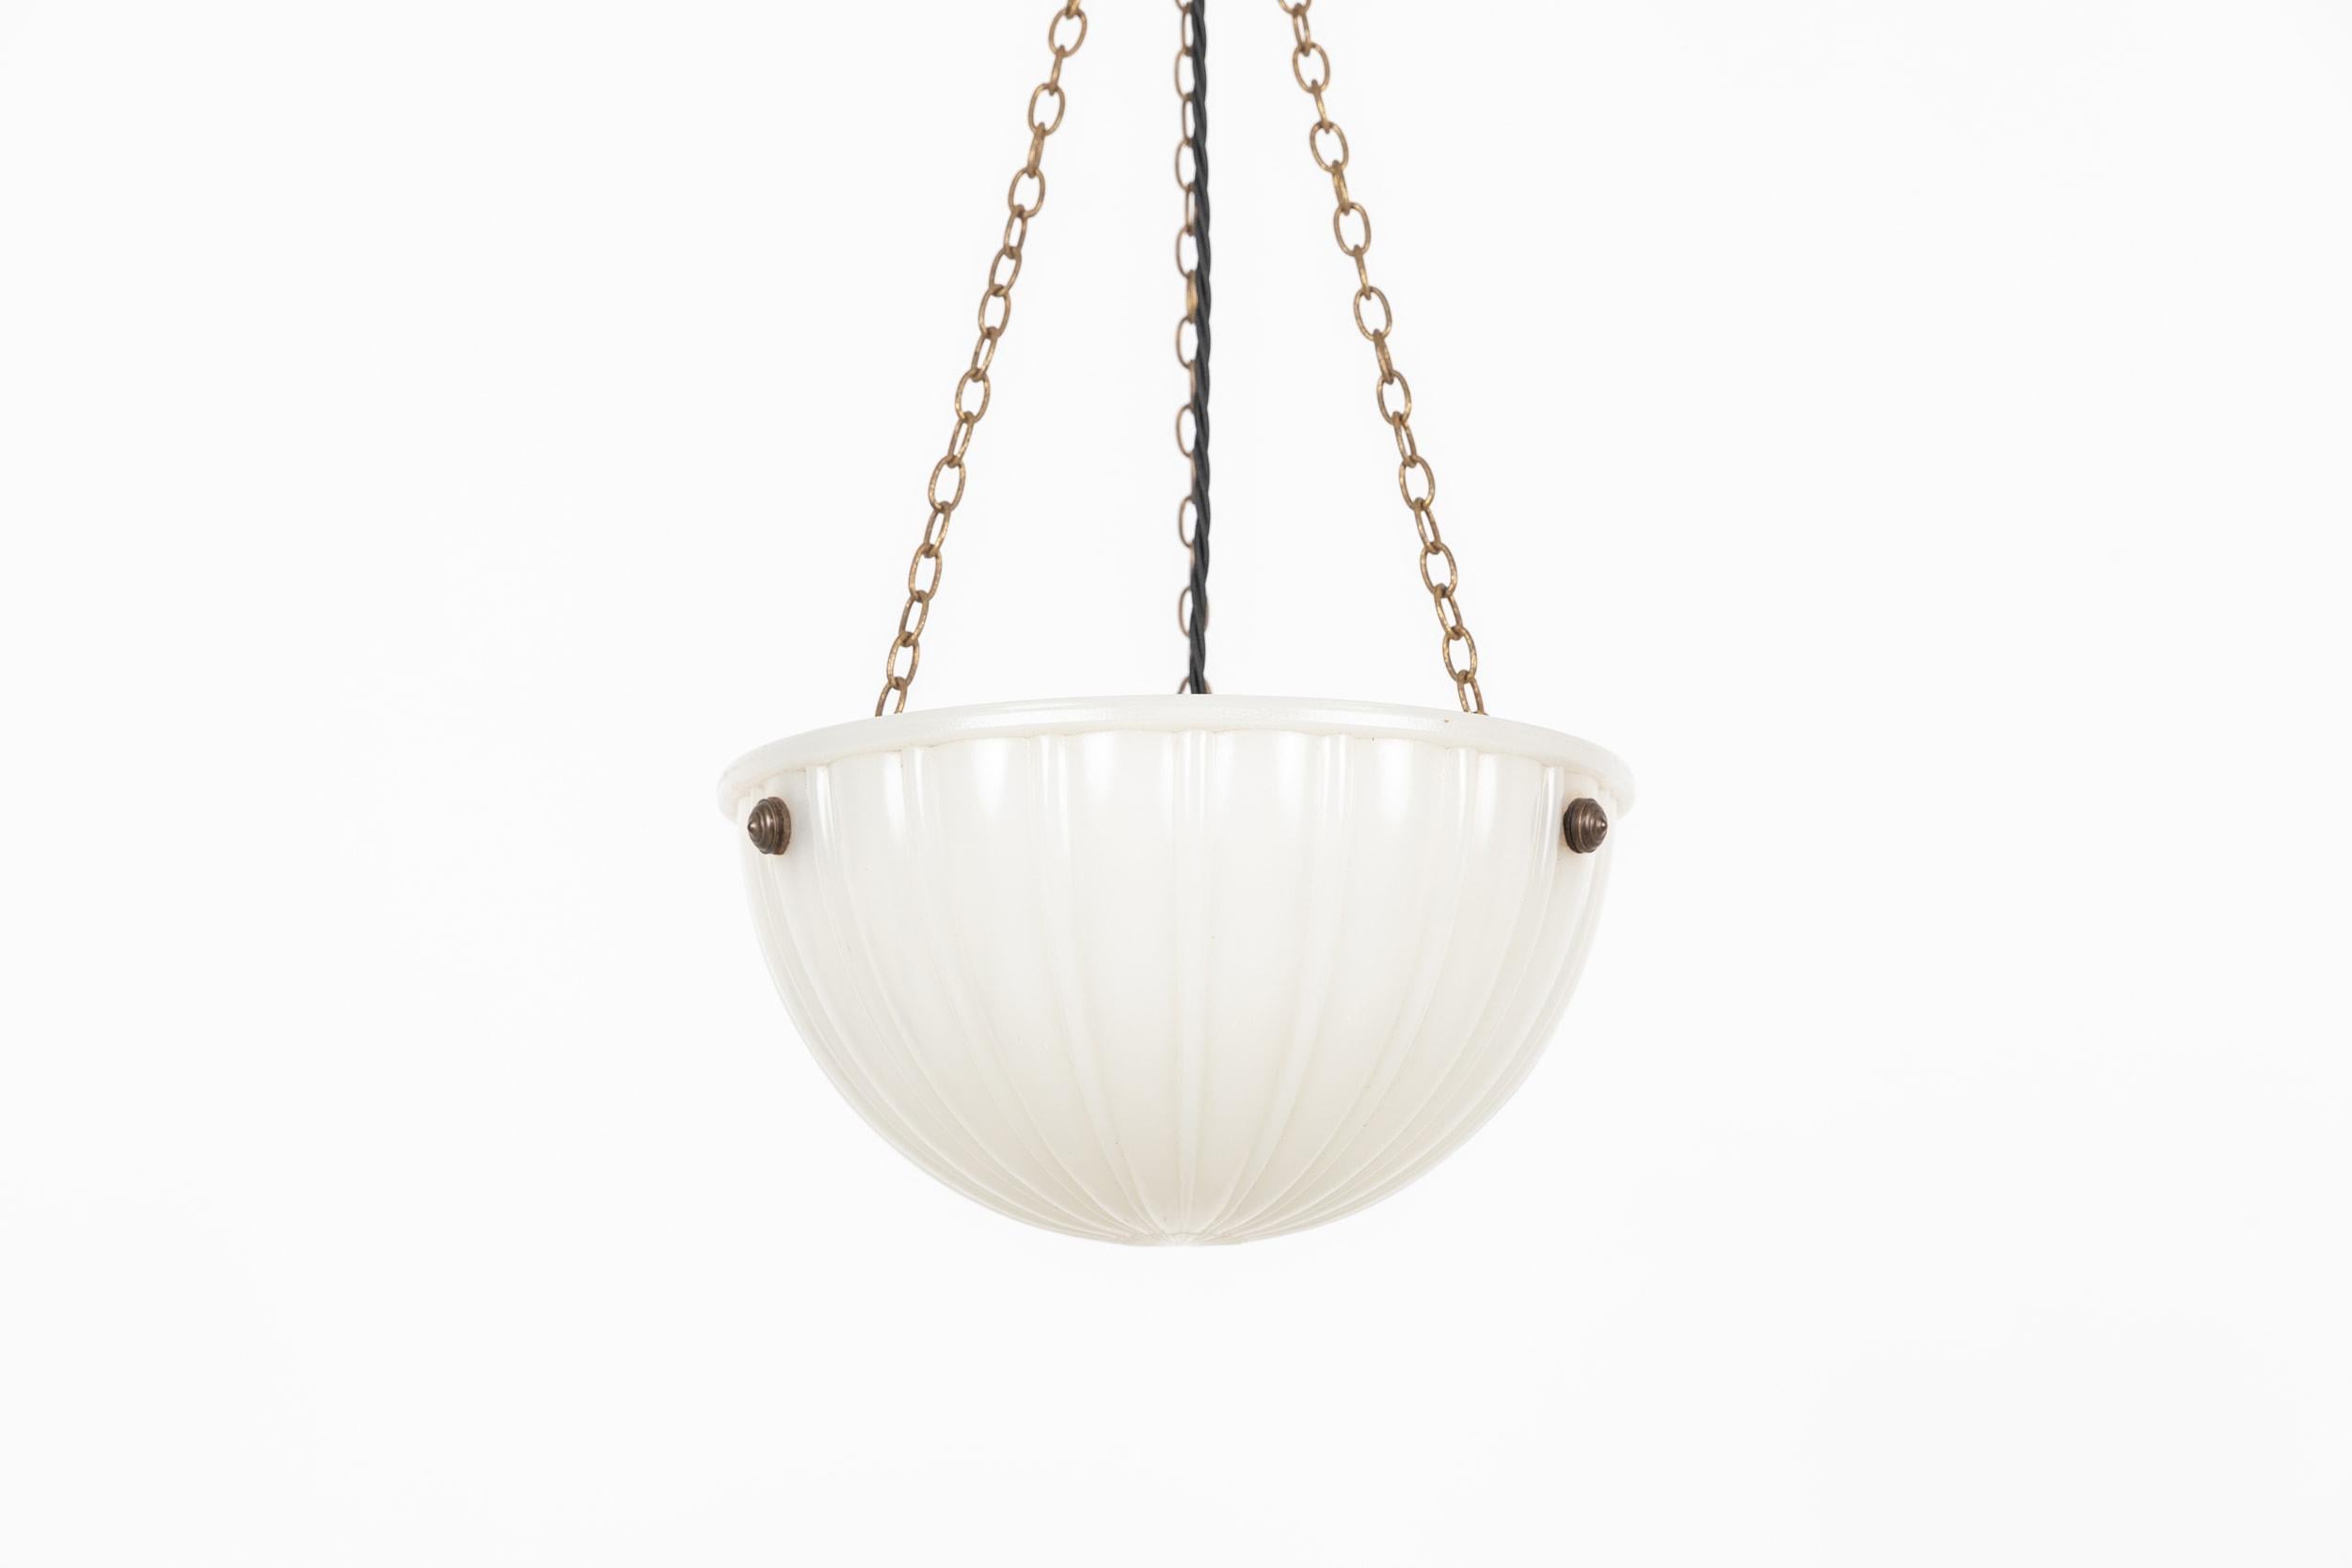 

A beautiful pressed glass 'Moonstone' bowl plaffonier light. c.1930

Heavy duty pressed milk glass of fluted design, supported by integral hooks and ceiling plate. Chains could be shortened to suit drop.

Rewired with black twisted flex.

Please